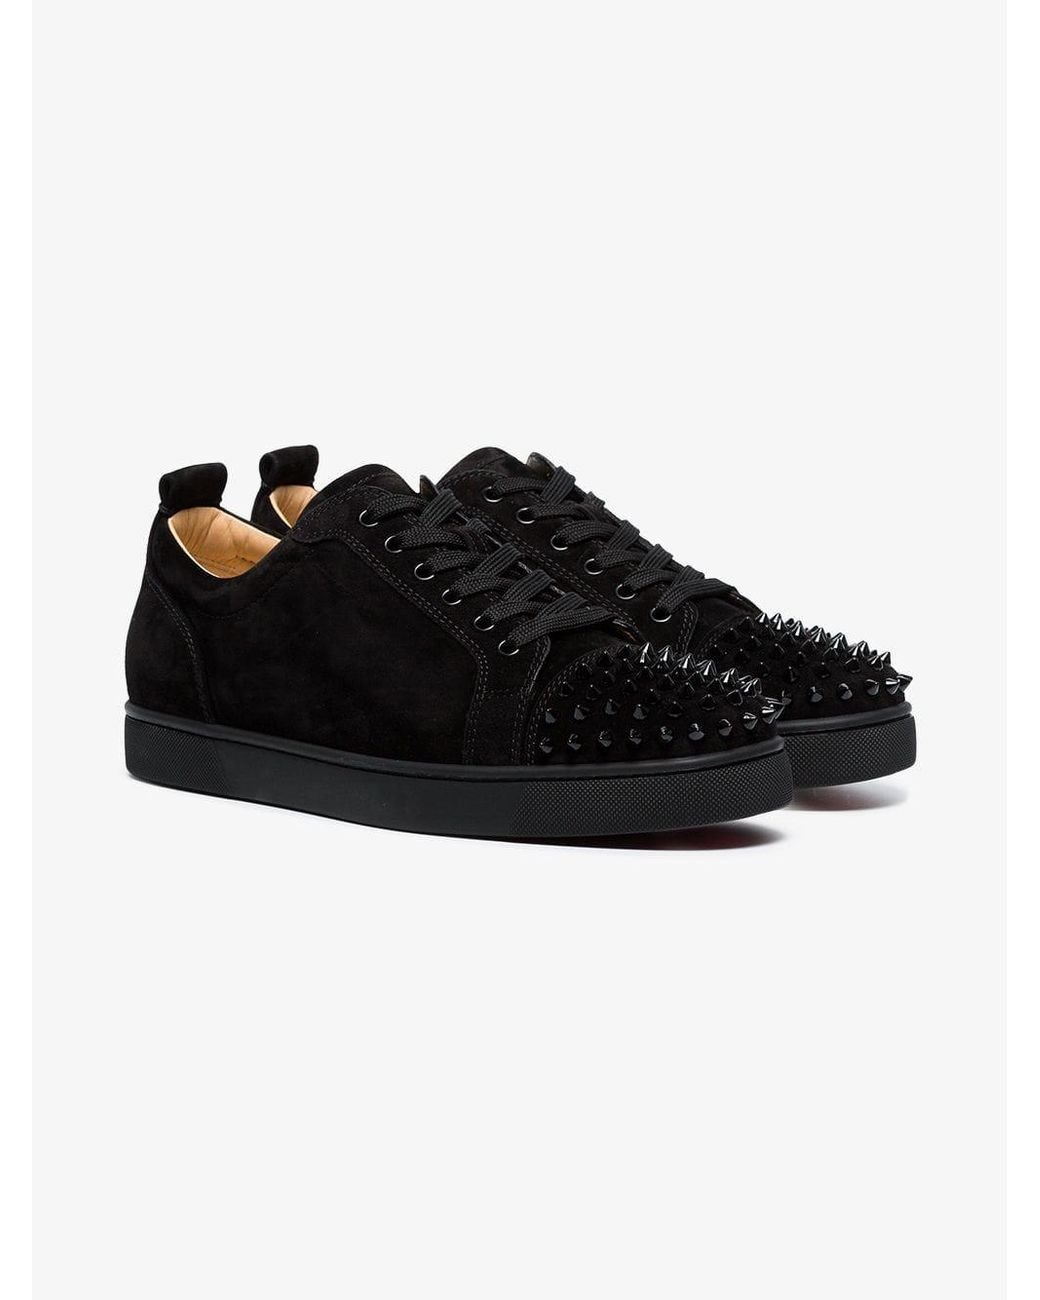 Christian Louboutin Black Leather Louis Junior Spike Sneakers for Men | Lyst